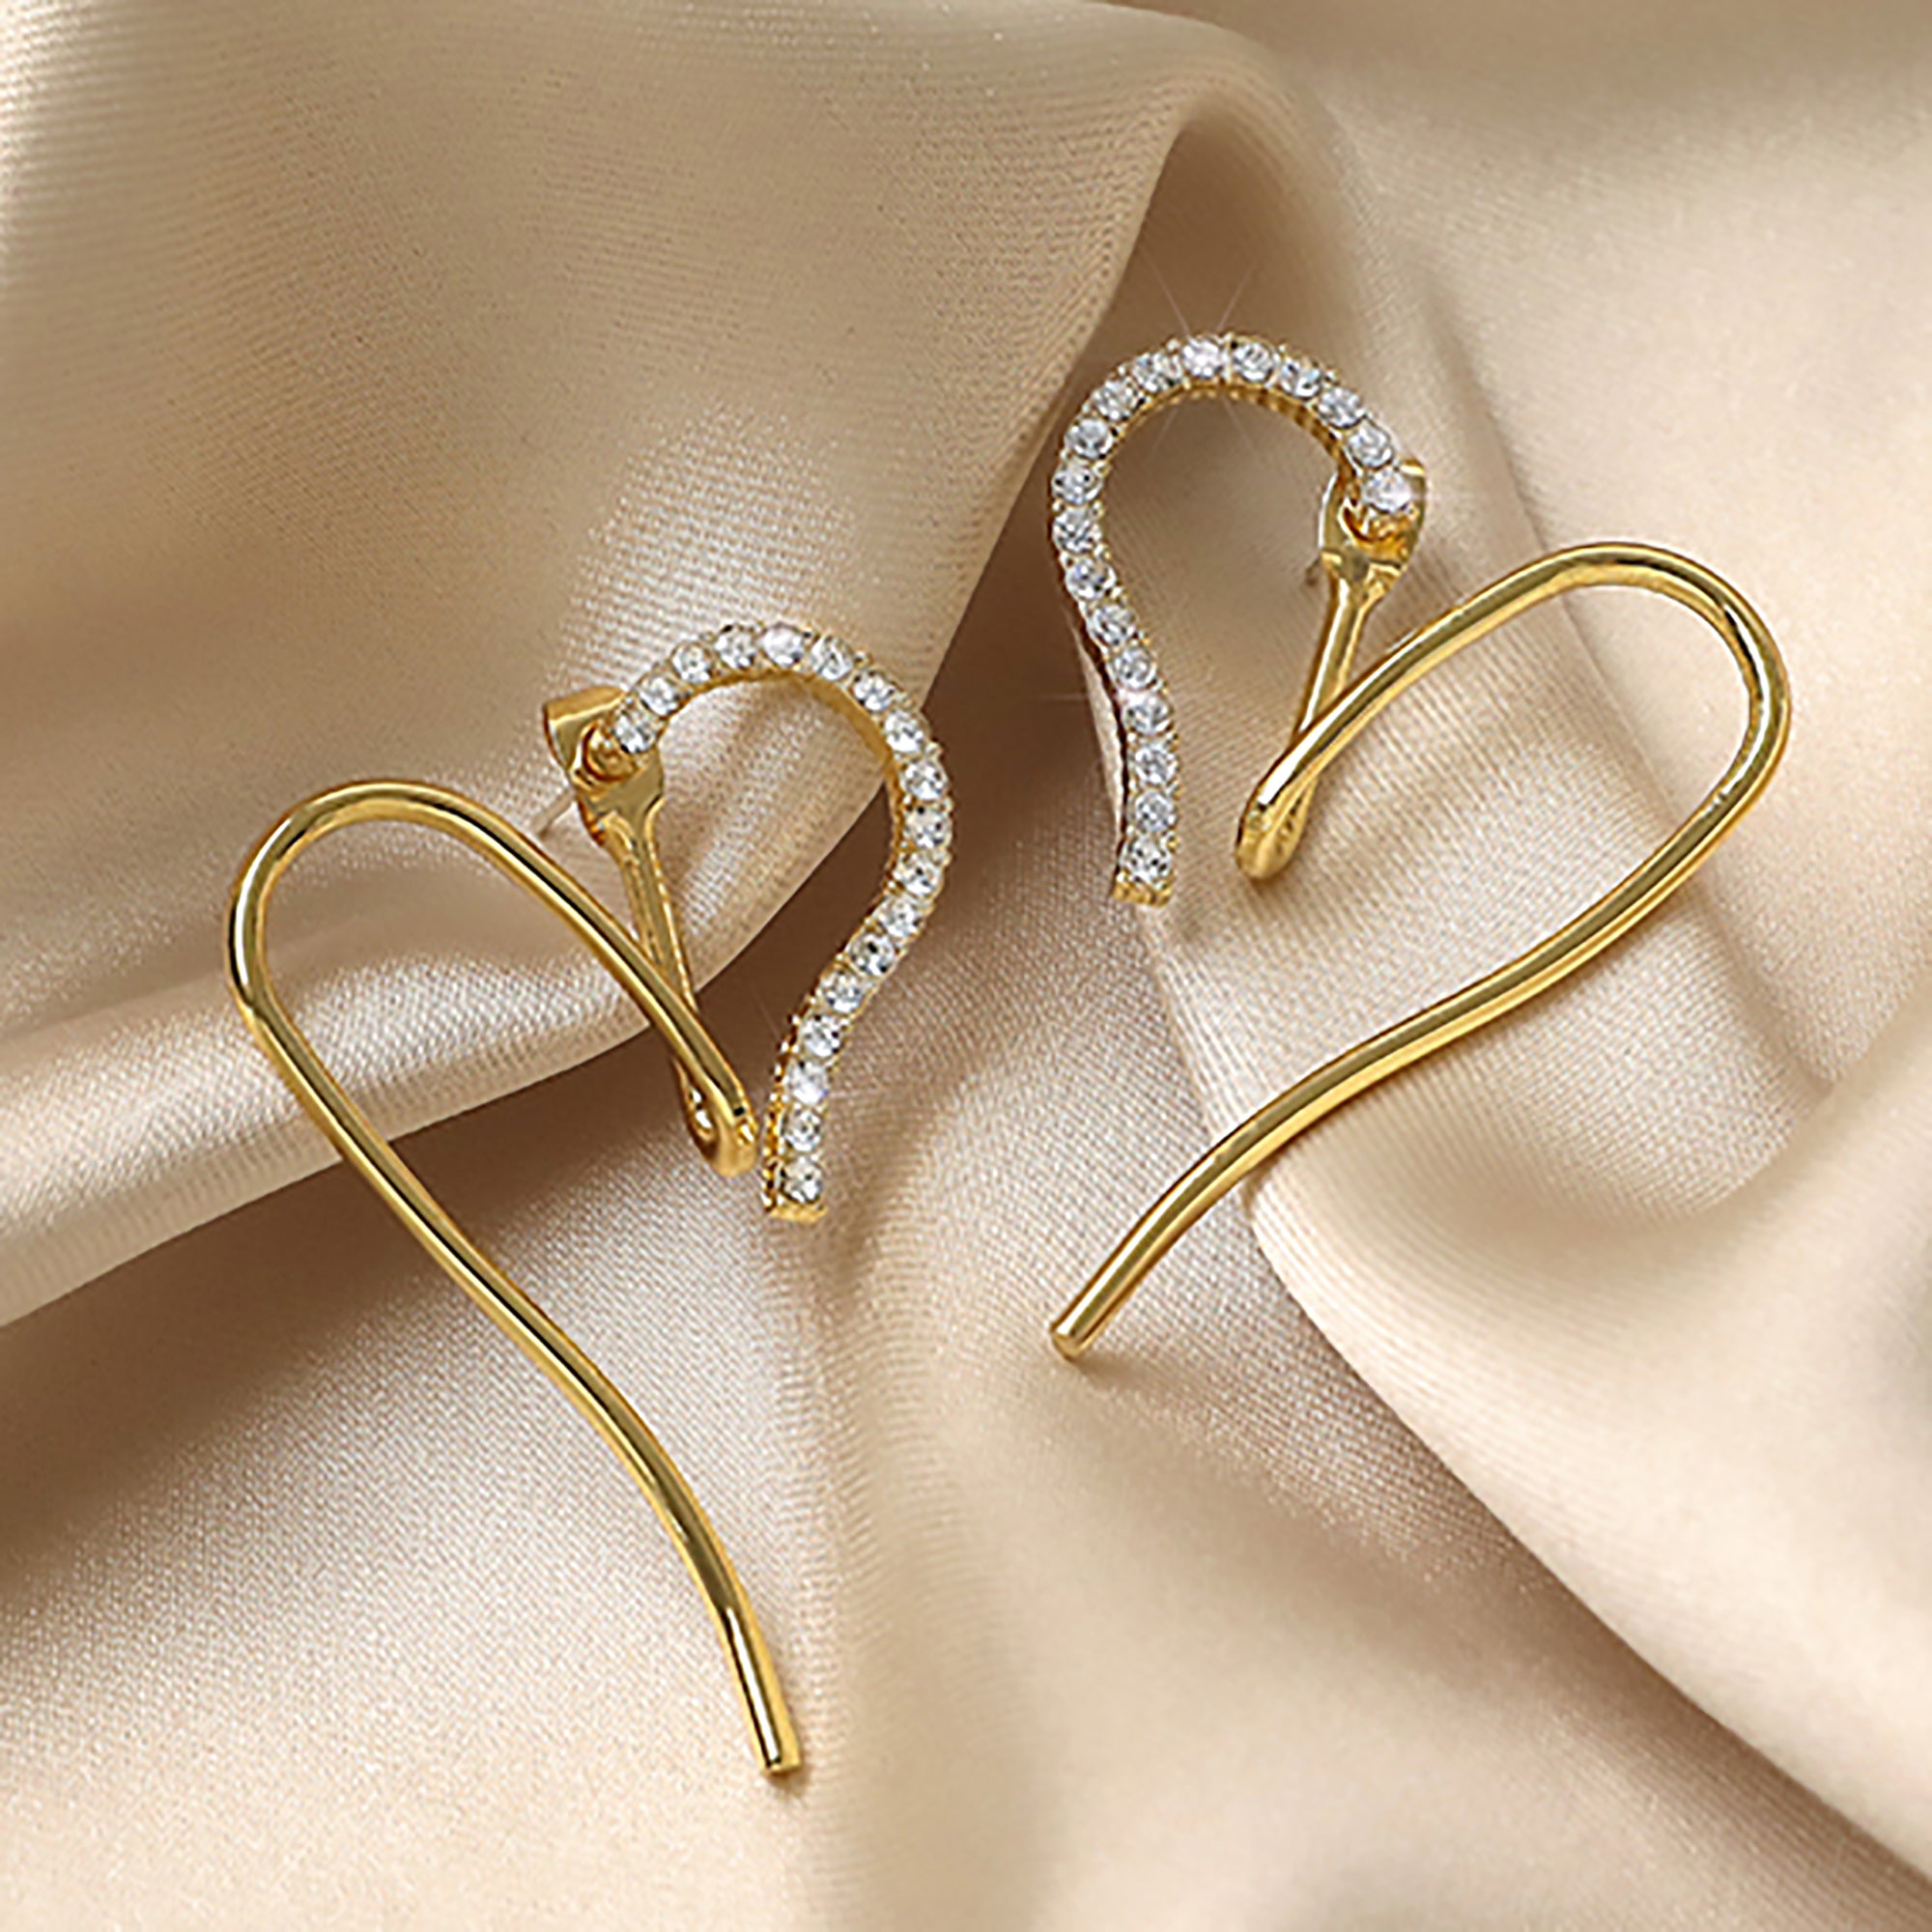 18K Gold Plated CZ Heart Double Side Earrings Gift wedding influencer styling KOL / Youtuber / Celebrity / Fashion Icon picked